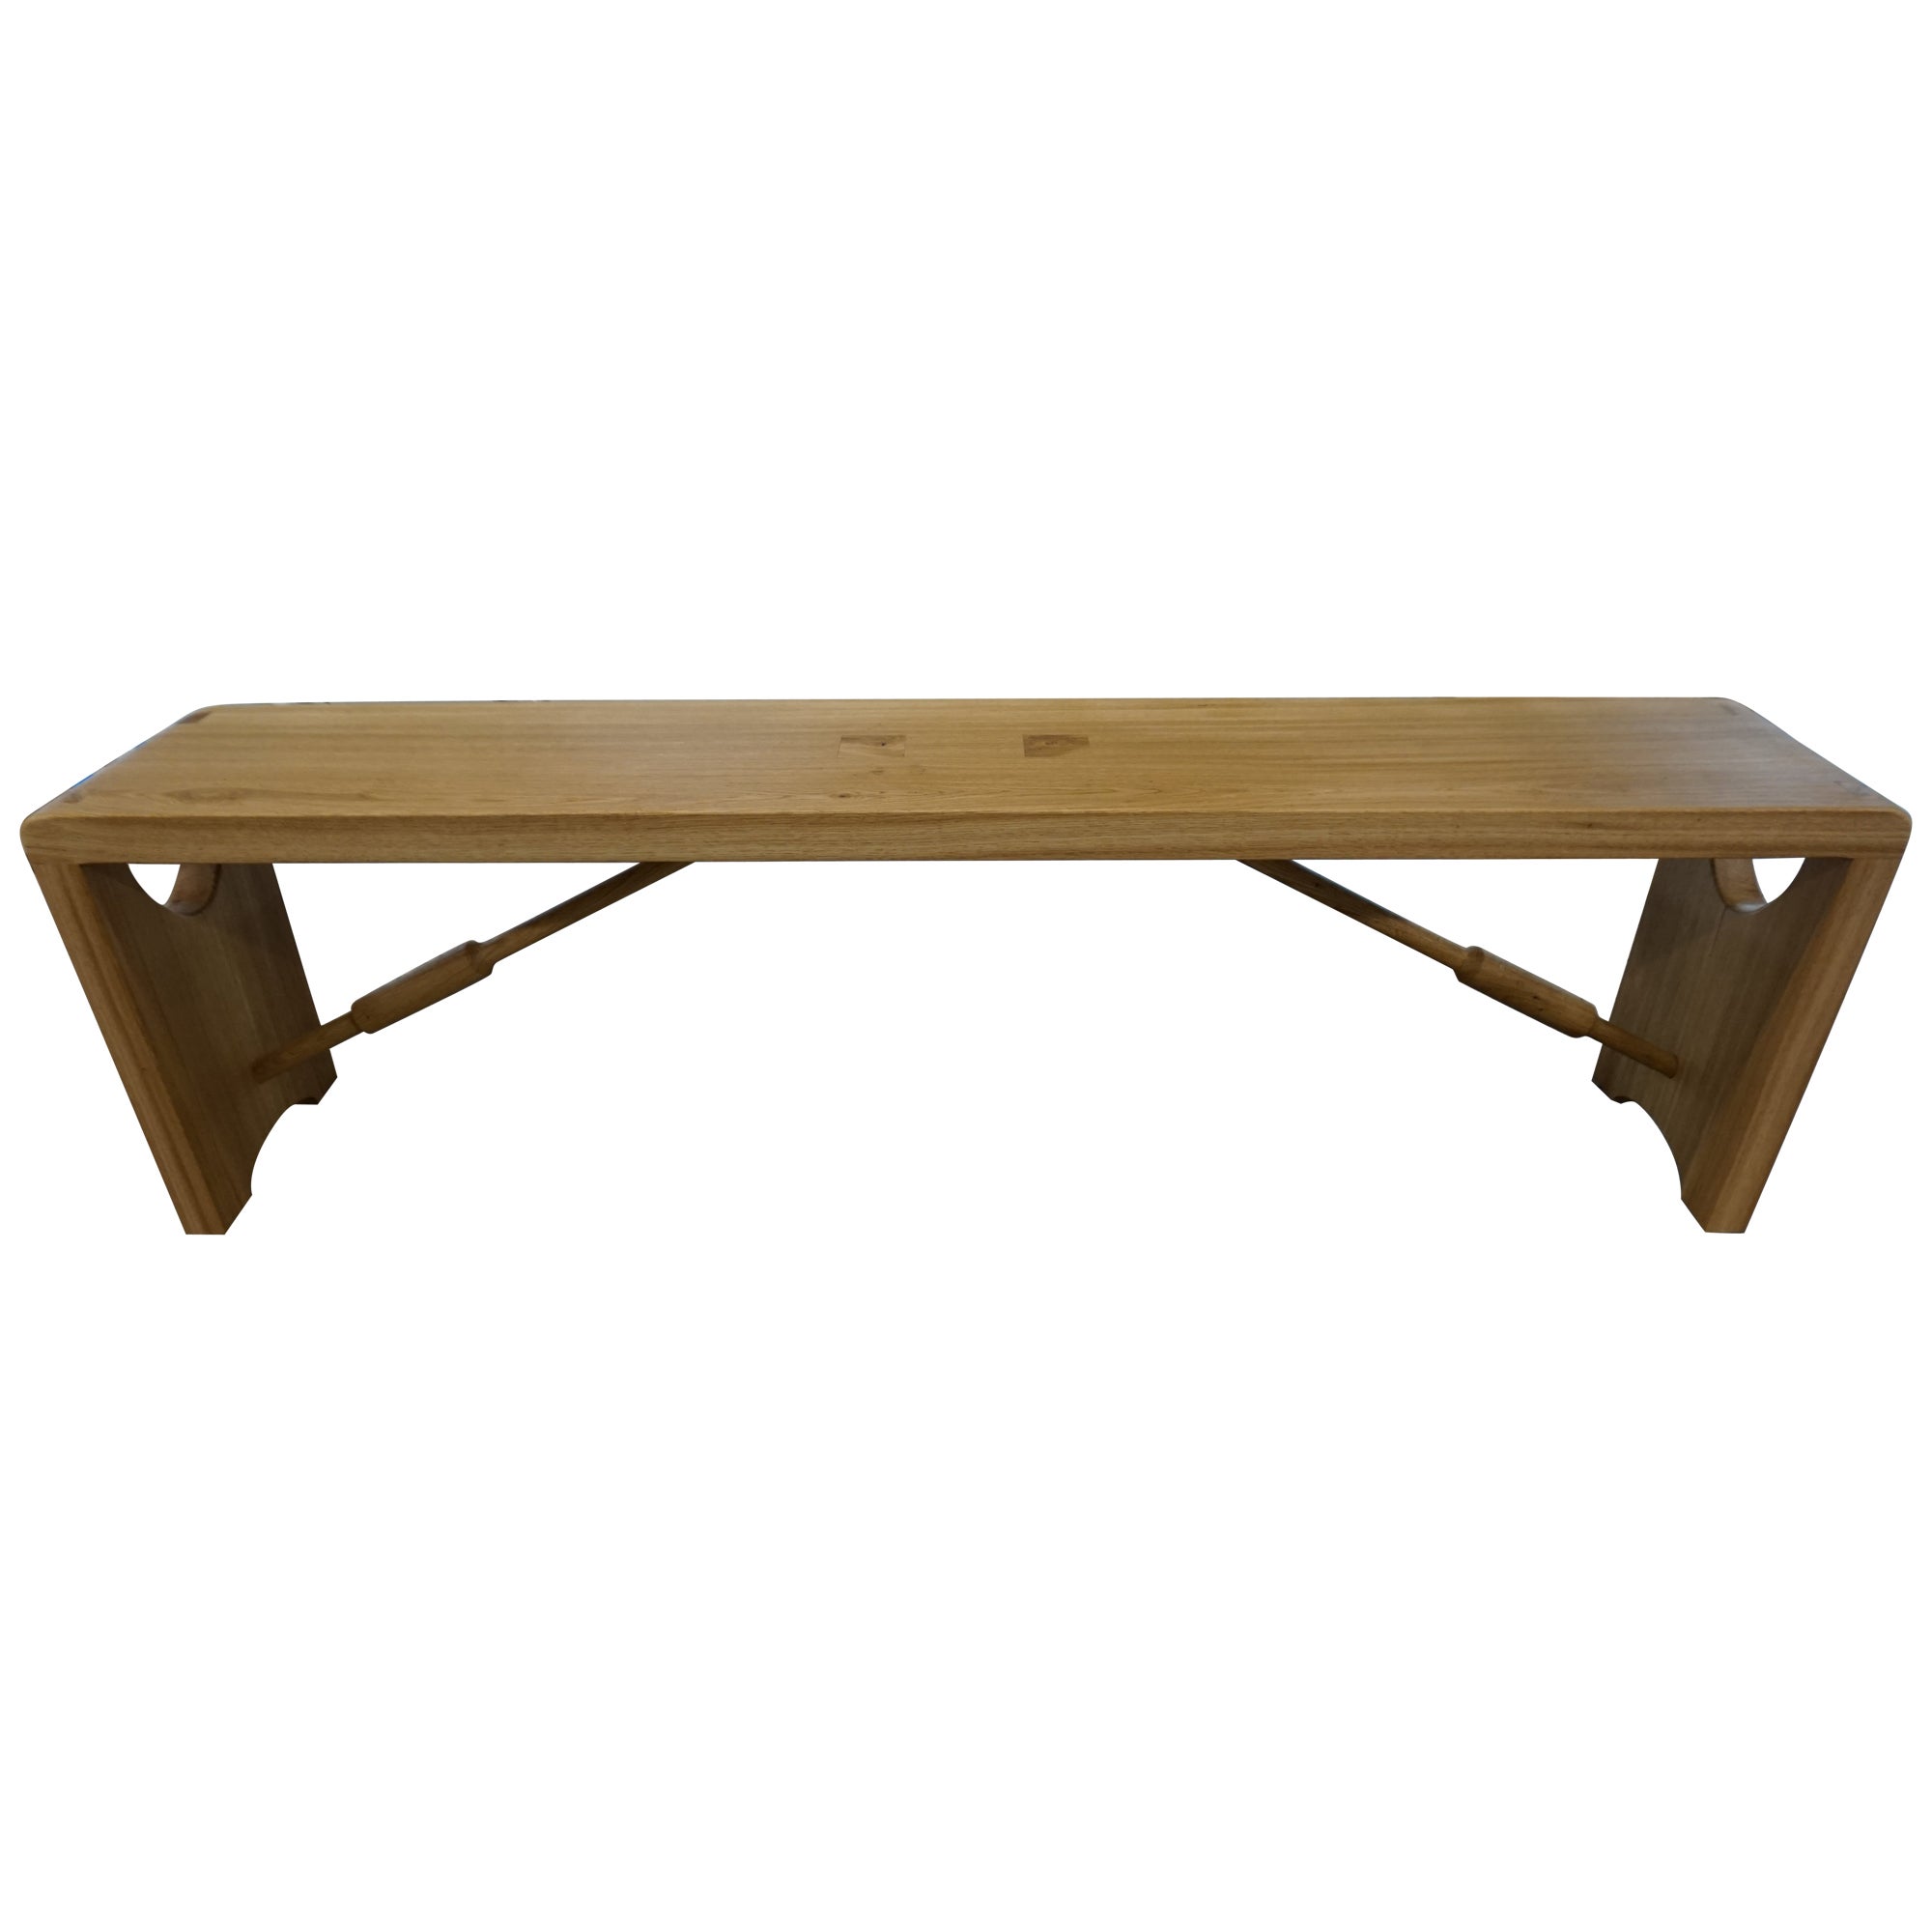 A hand made oak bench perfect for an entryway or to accompany a dining table. Curved corners reveal hand cut dovetail joints for joining the legs to the seat and two elegant spindles stabilise the structure. We wanted to highlight the natural aspect